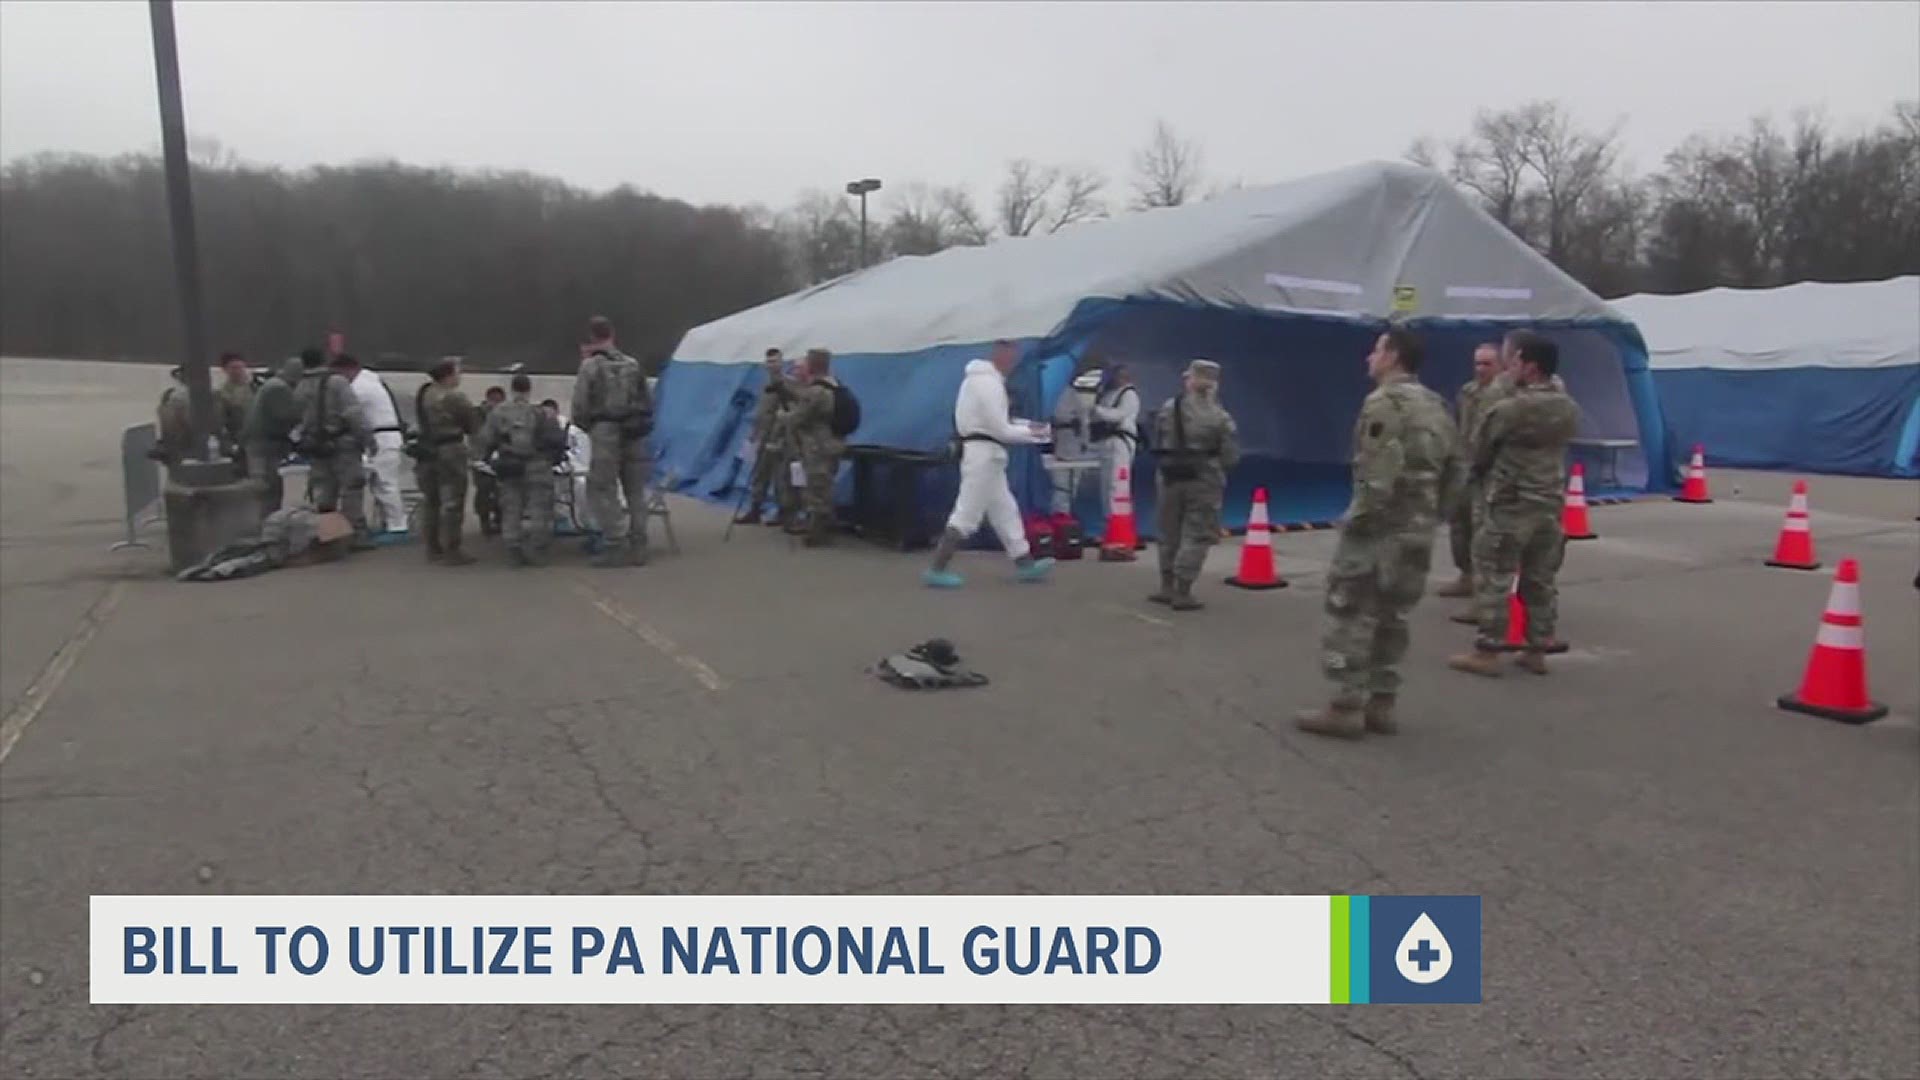 The bill would require the Pa. National Guard to create a plan on how they could be utilized, specifically at mass vaccination sites.